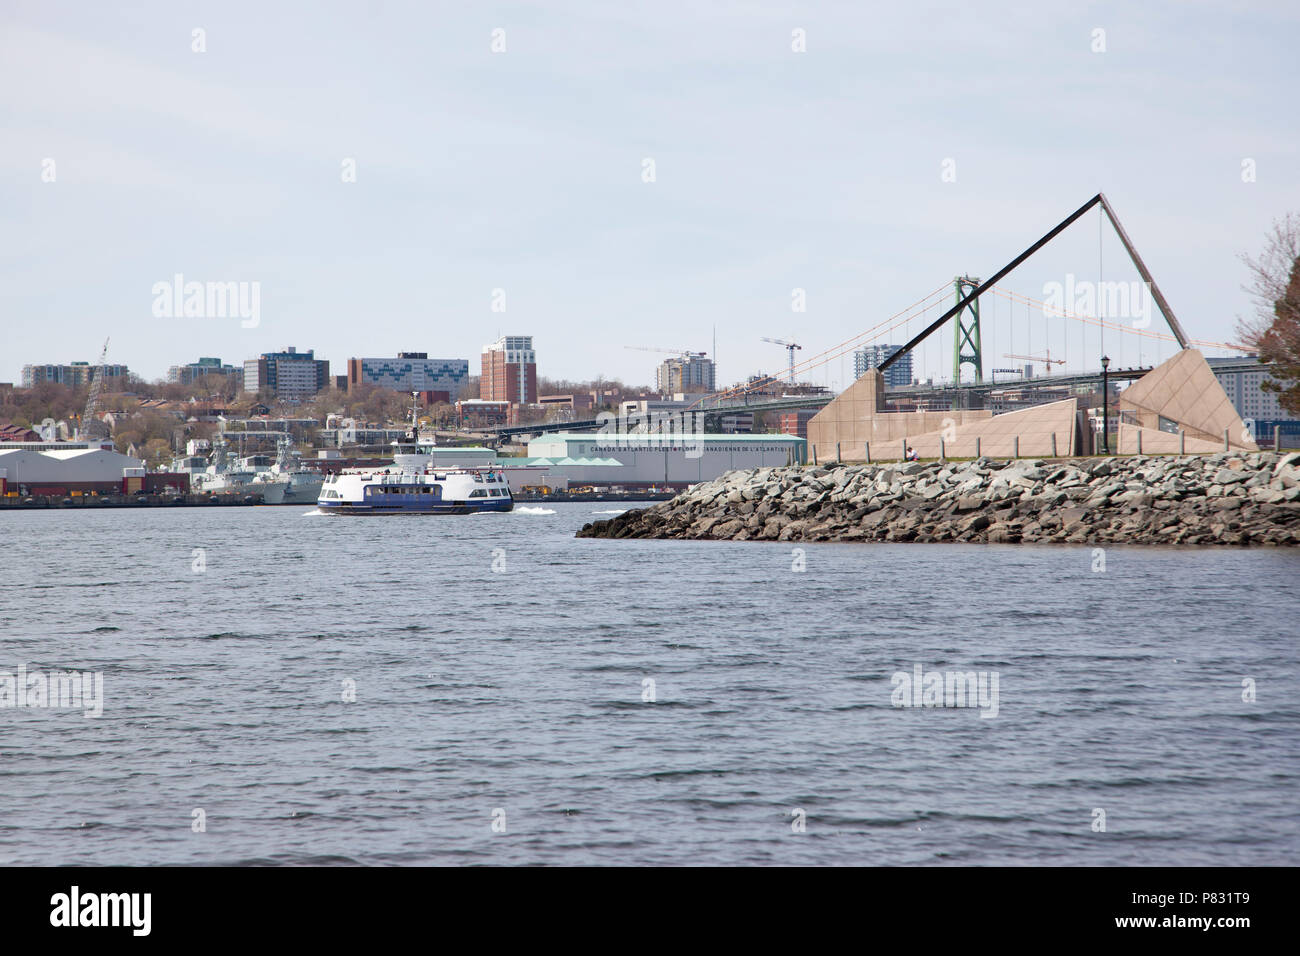 May 12, 2018 - Dartmouth, Nova Scotia: Looking at the Alderney Landing on the Dartmouth waterfront with a ferry crossing and naval shipyard in the bac Stock Photo